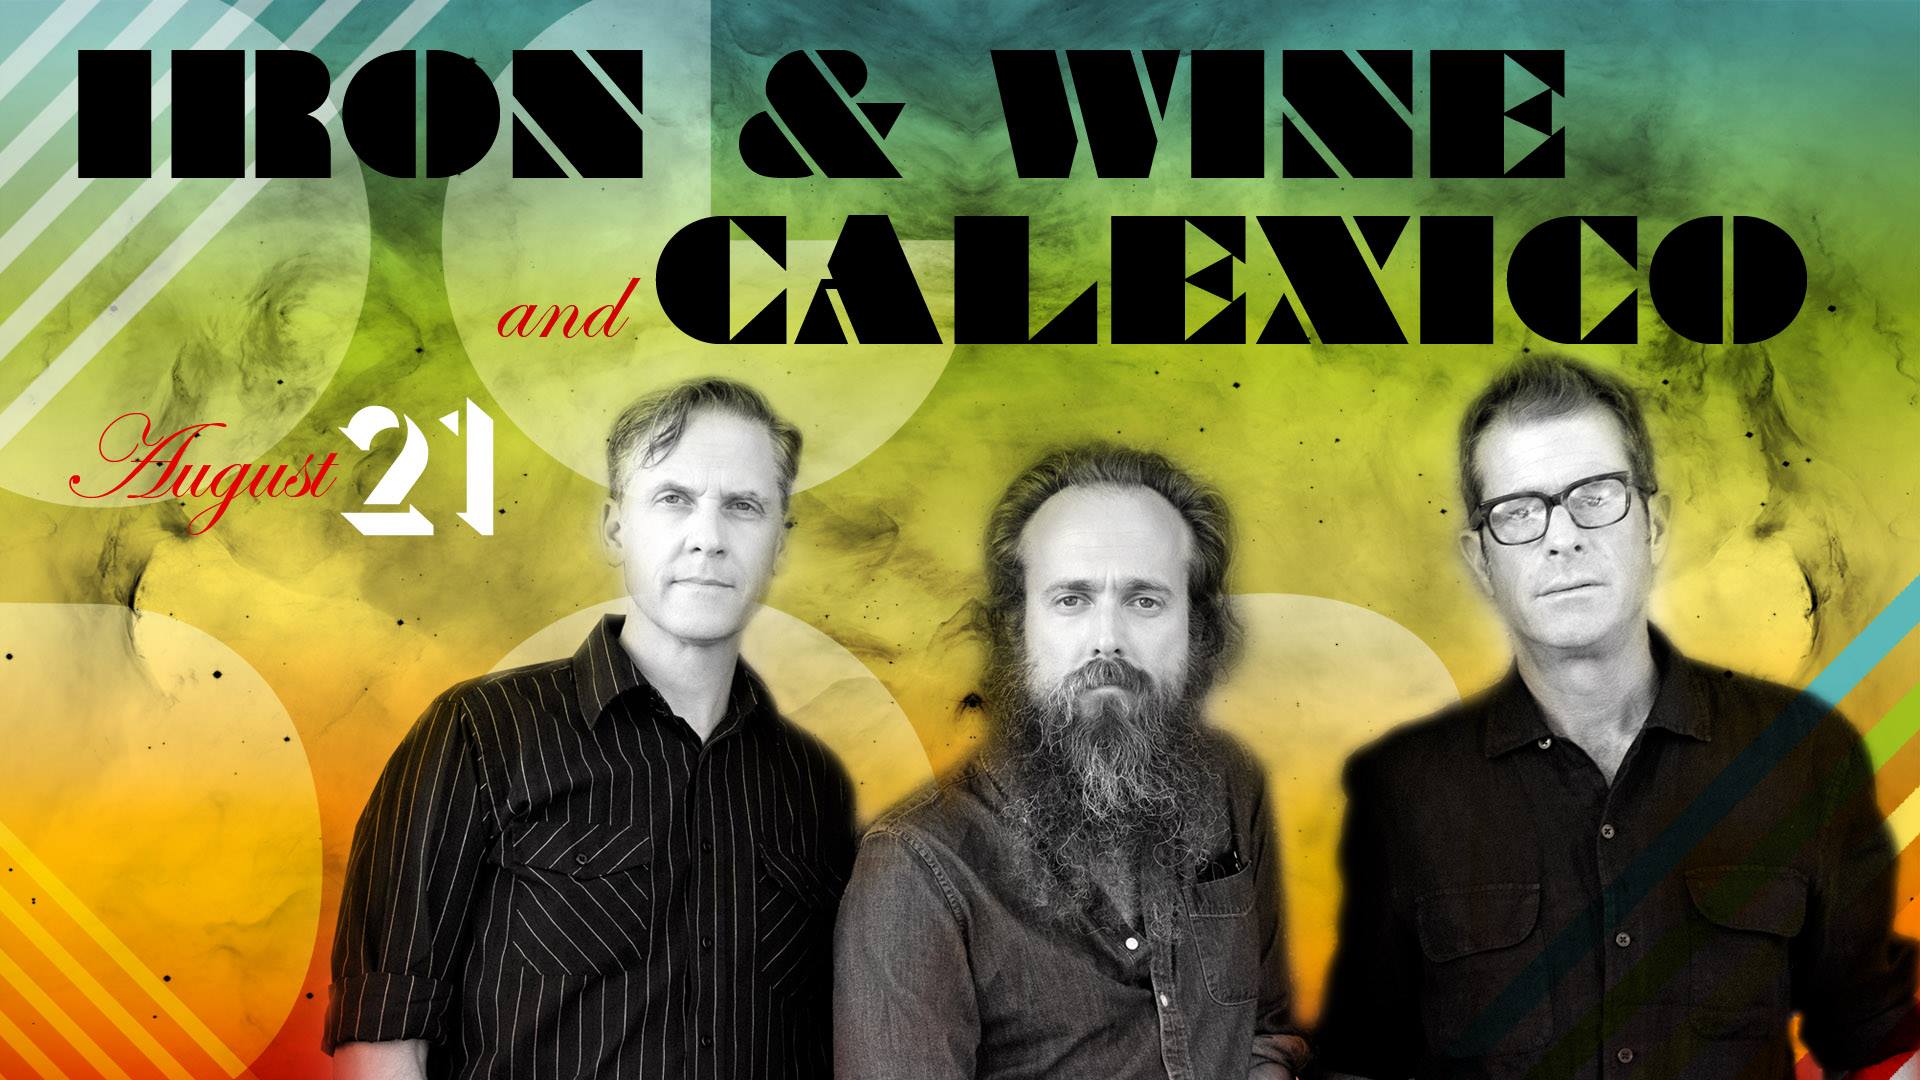 iron and wine and calexico